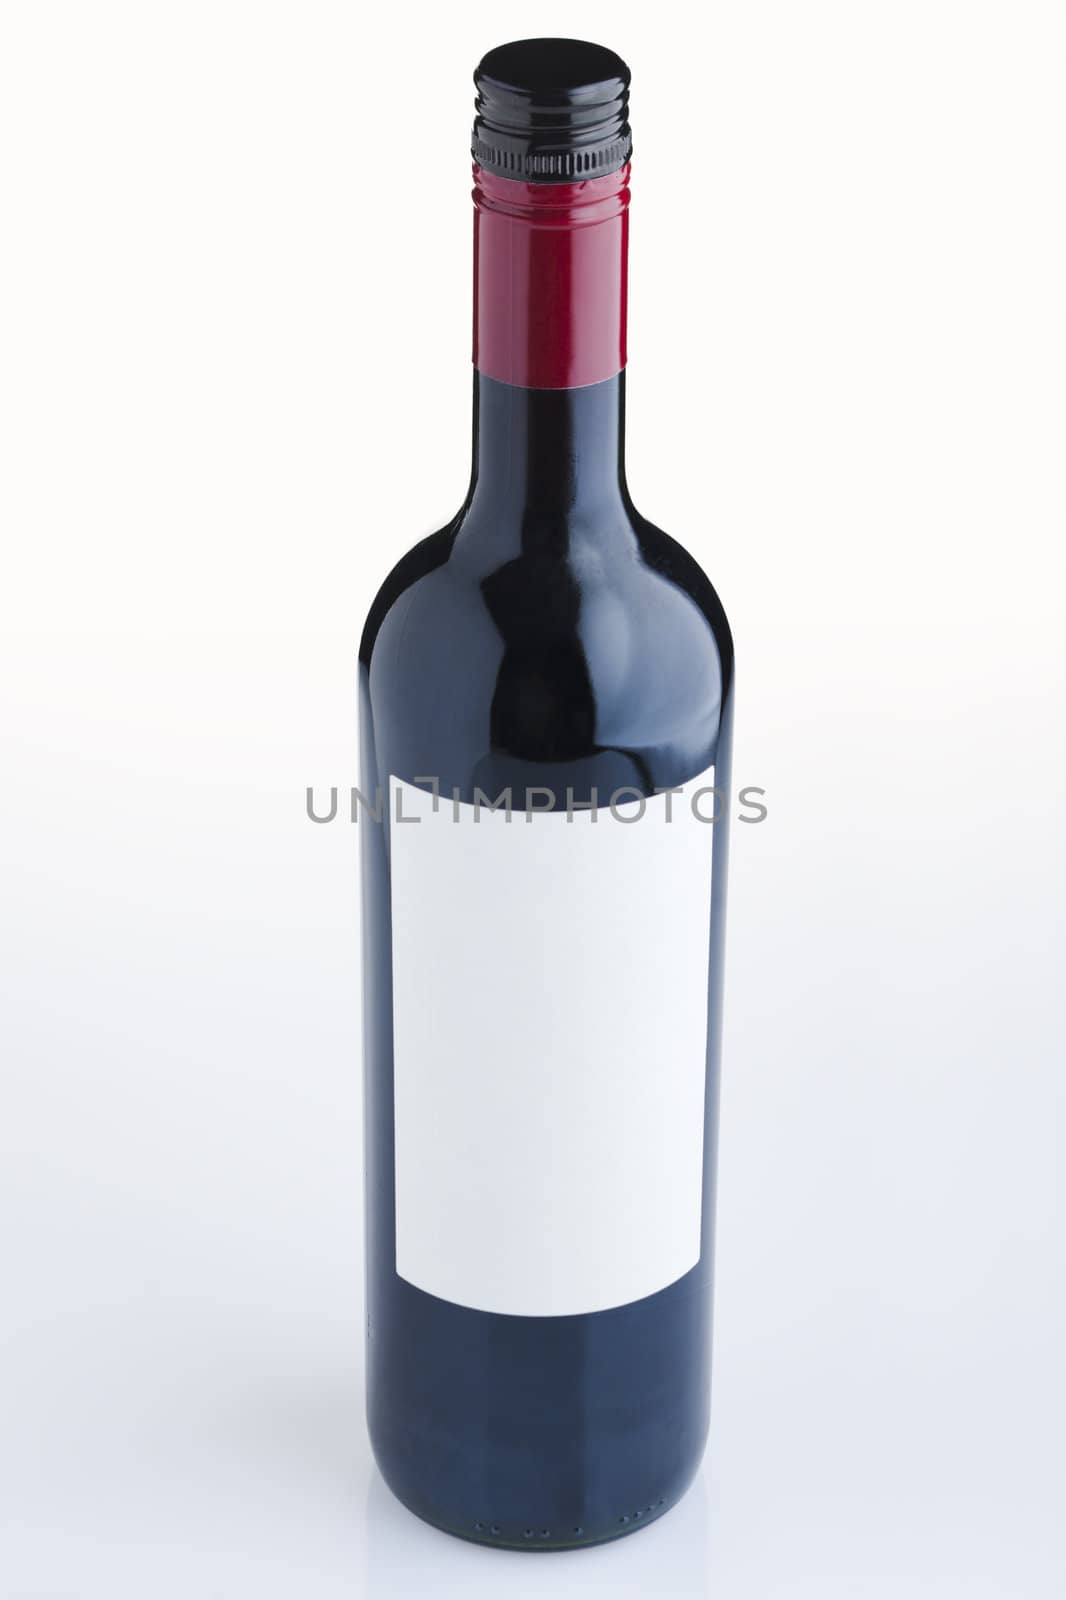 Red wine bottle with empty label over white background